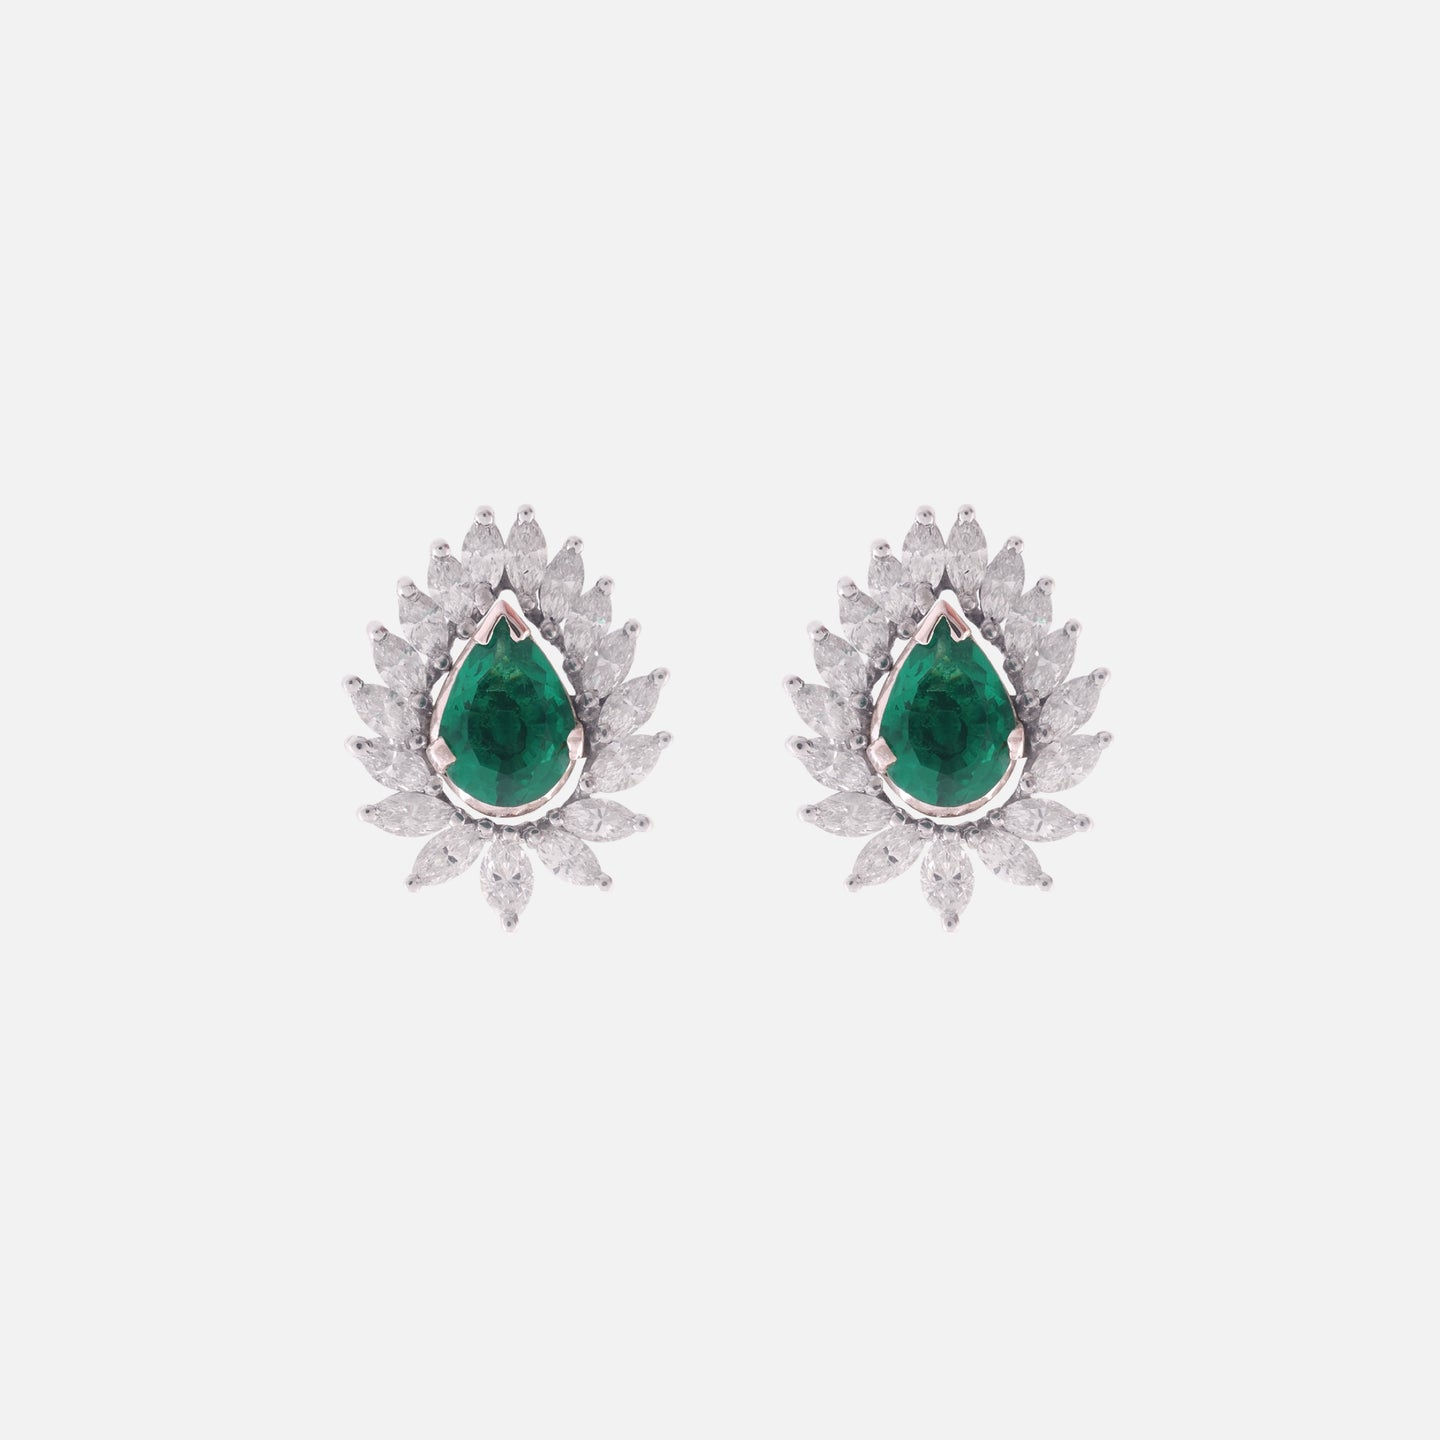 18K White Gold Pear Shaped Emerald Earrings with Diamond Jacket